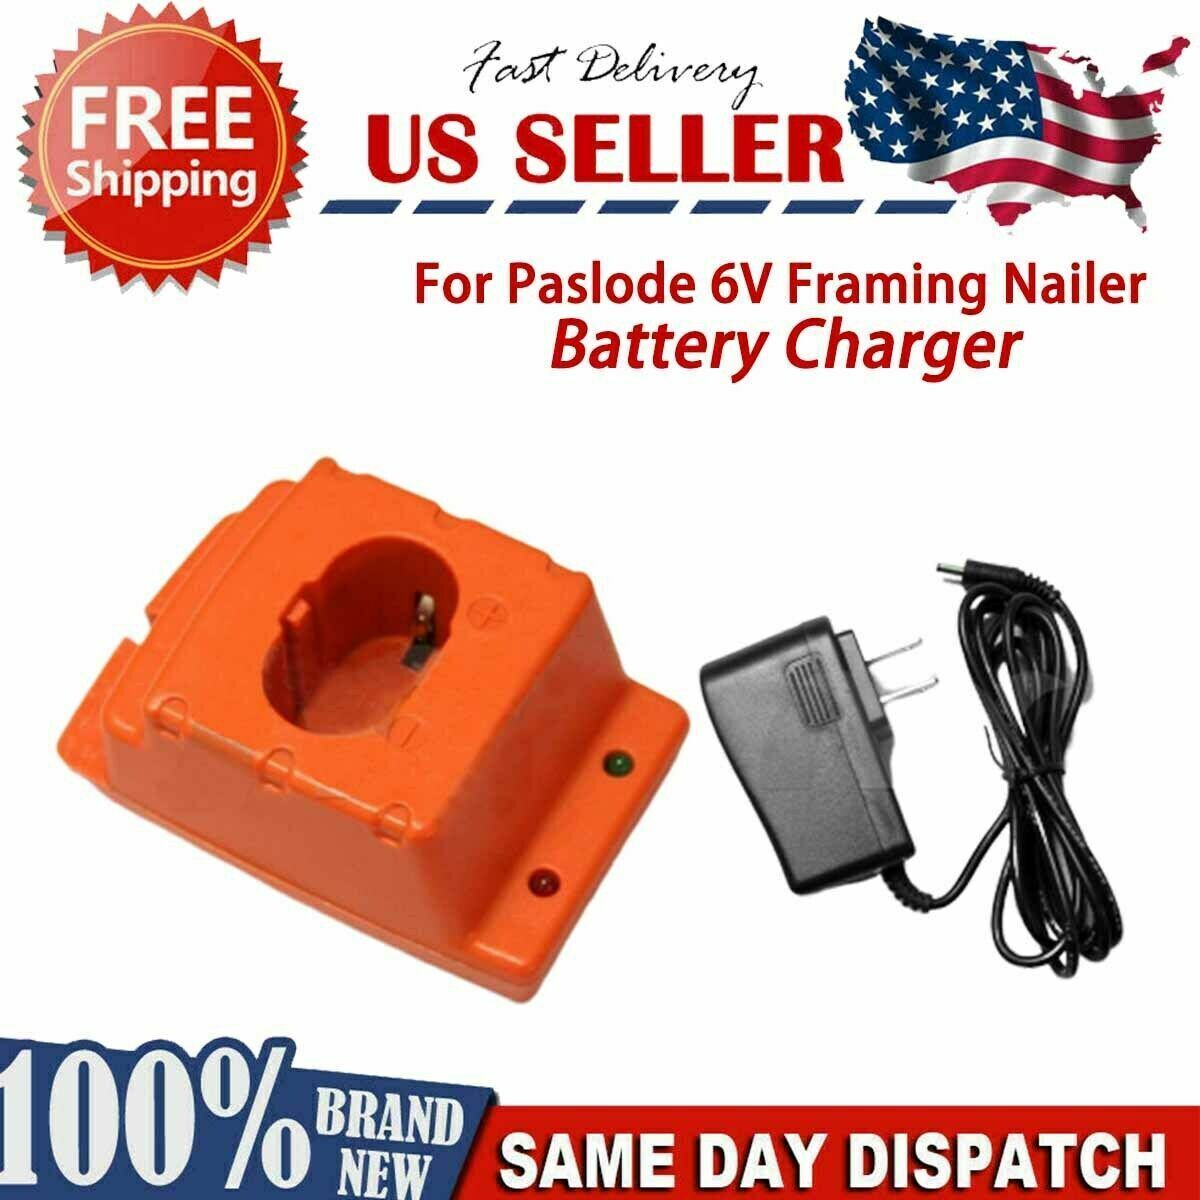 Battery Charger For Paslode Nailer Impulse 404717 902000 900420 902200 - $51.99